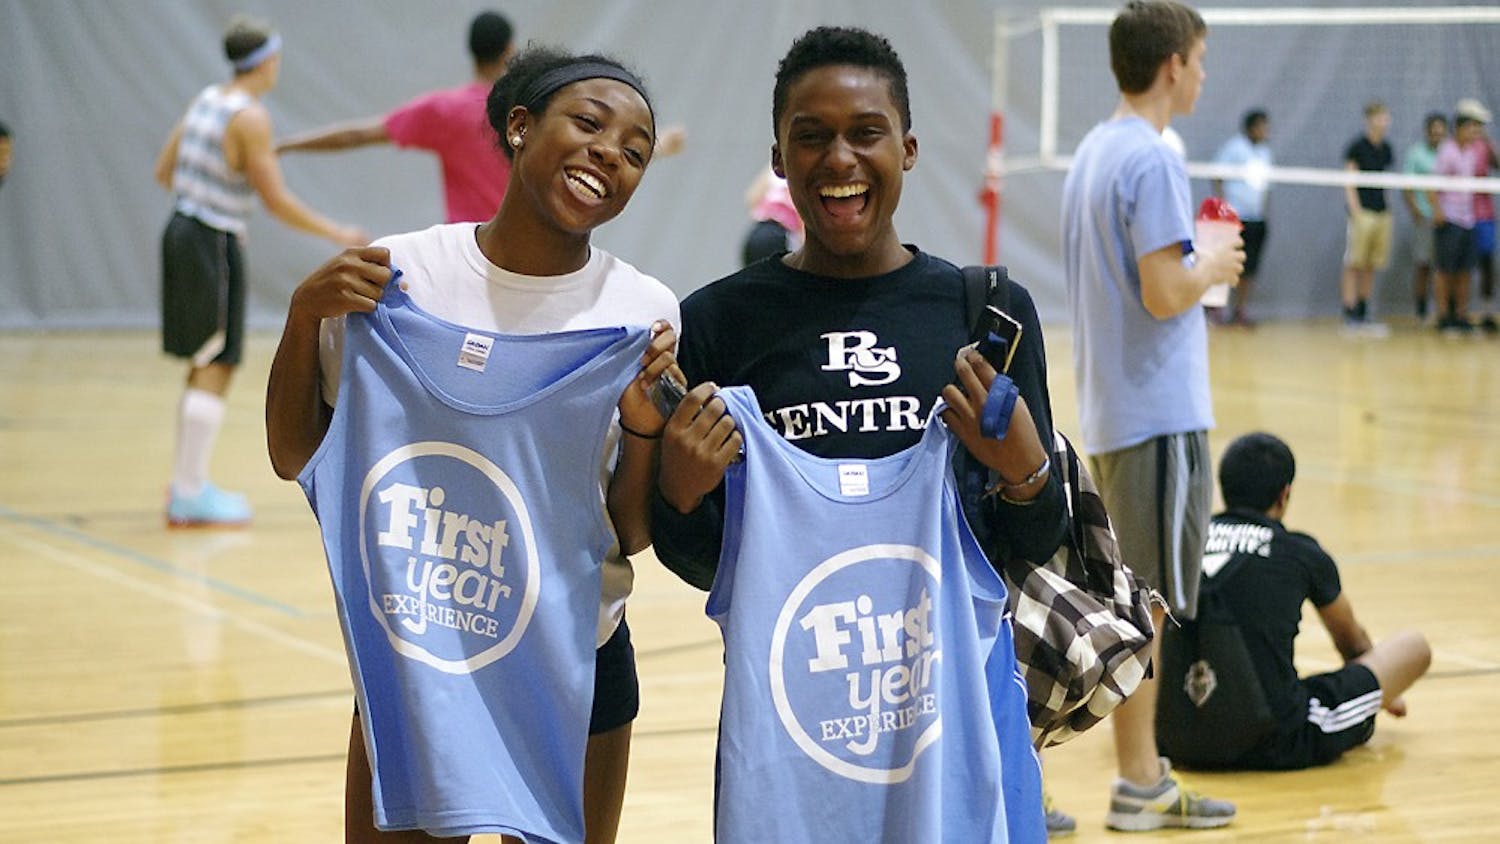 Freshmen Janice Ezenwa and Shawn Hines attended the First Year Experience basketball and volleyball tournament in Rams Head Recreation Center on Friday, Sept. 12, 2014. 